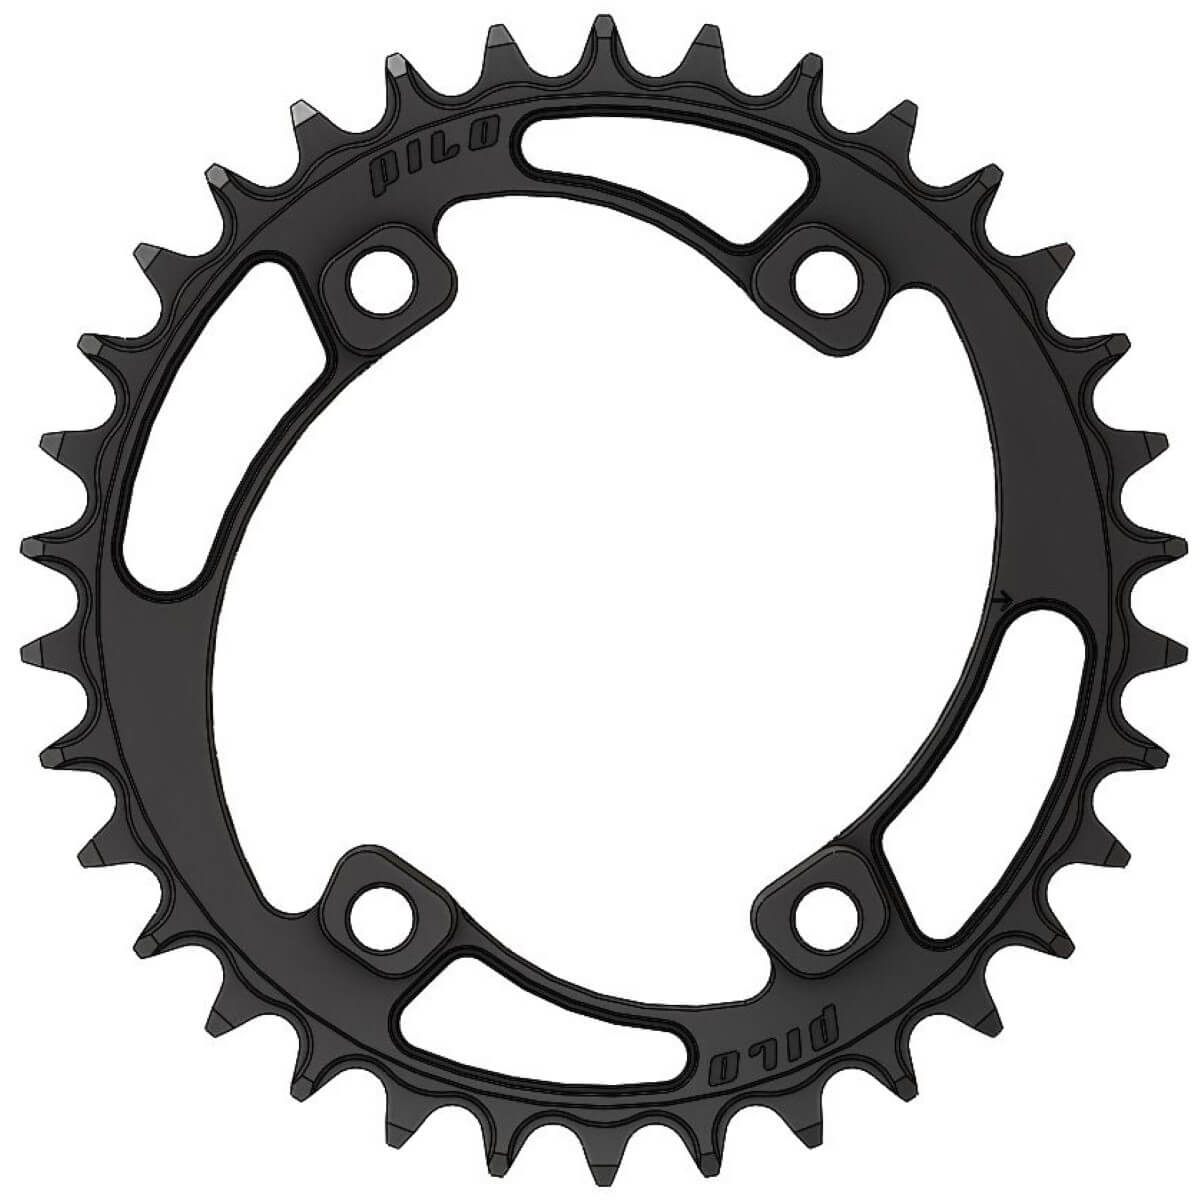 Pilo C52 Chainring Narrow Wide 34T for Shimano 96BCD Asymmetric. Hyperglide+ Compatible